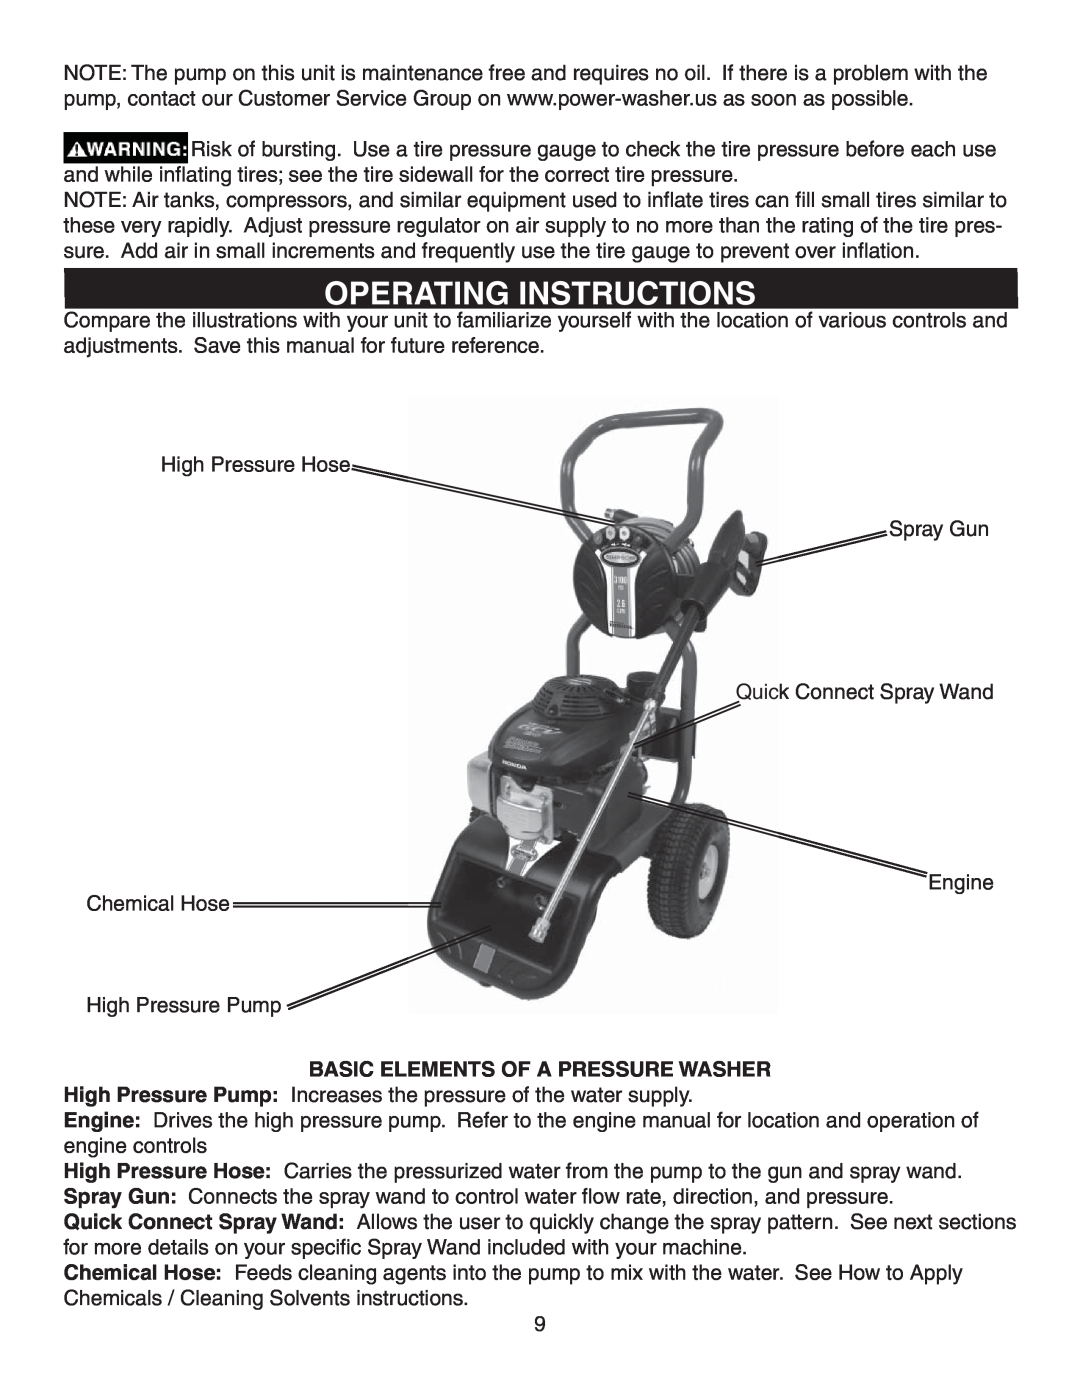 Simpson V3100 warranty Operating Instructions, Basic Elements Of A Pressure Washer 